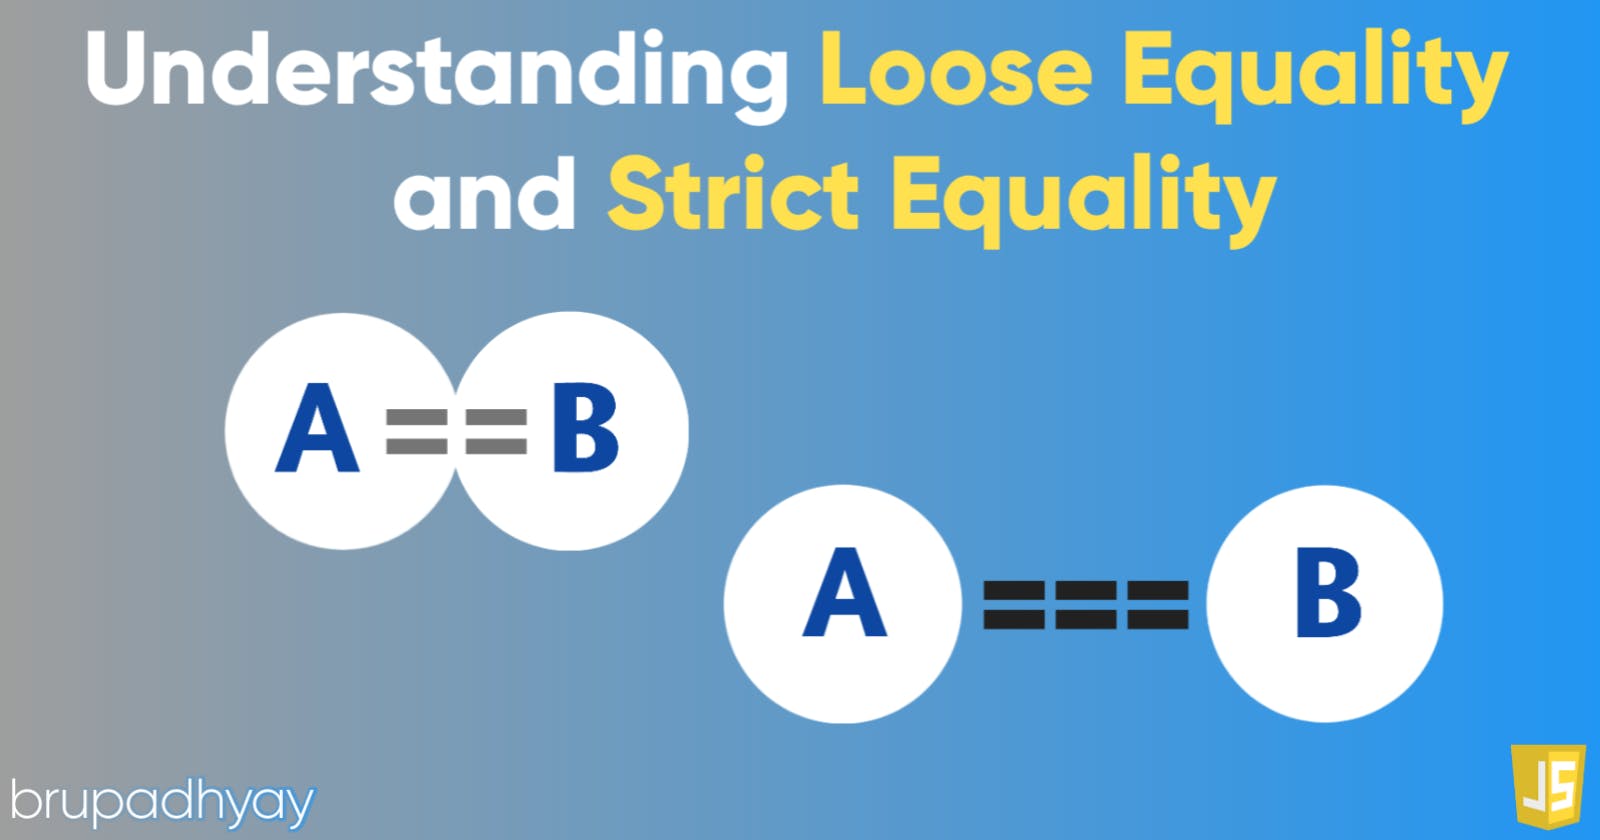 Grasping the difference between the strict [ === ] and loose [ == ] equality operators